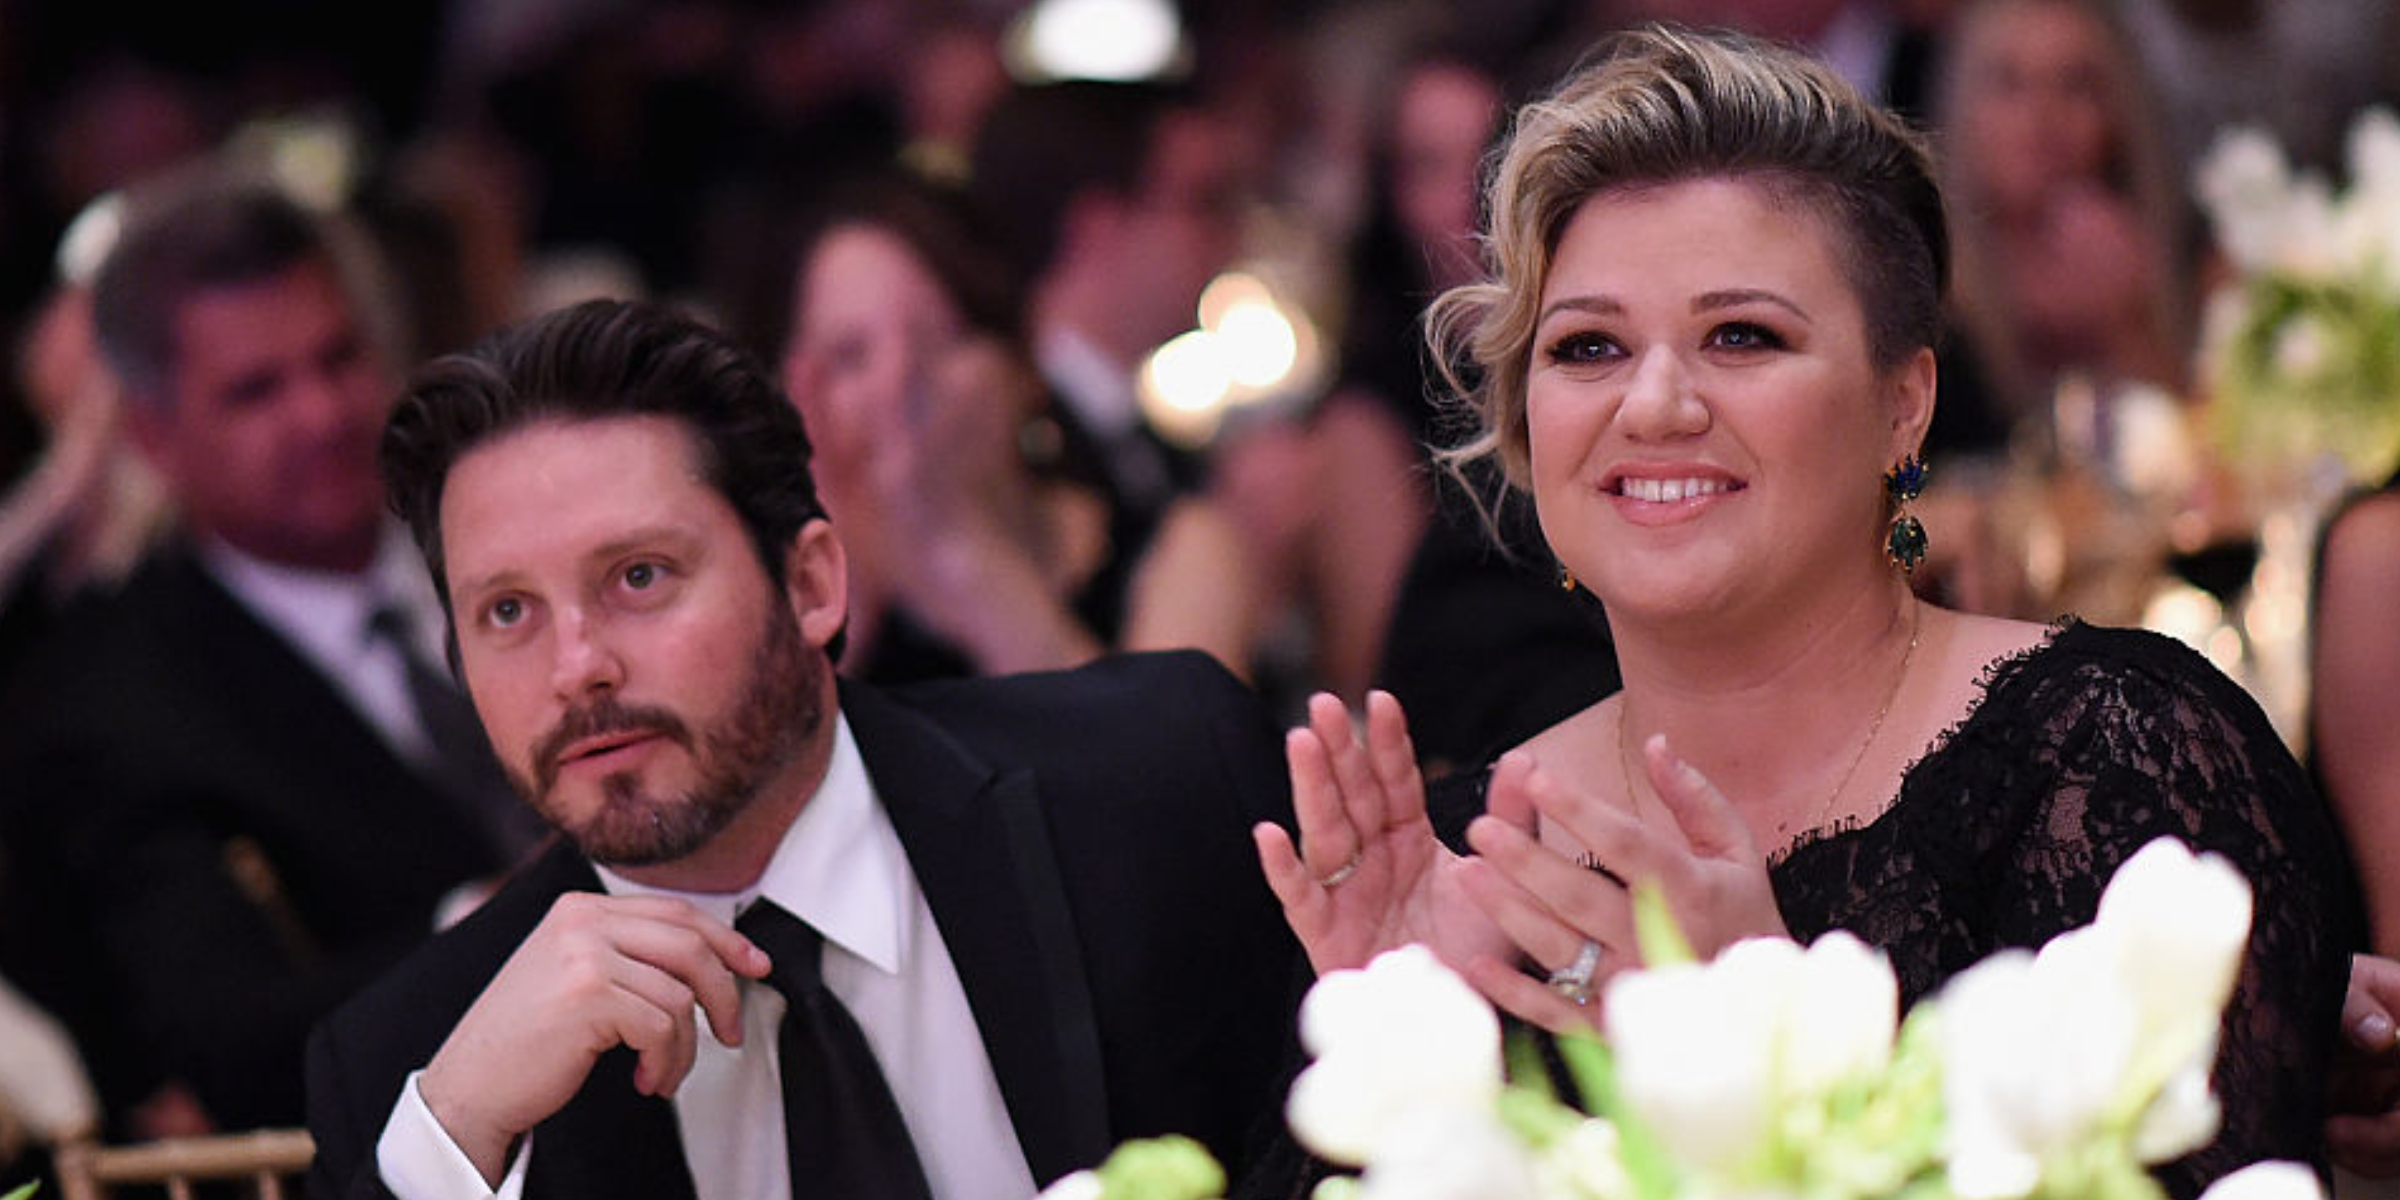 Kelly Clarkson and Brandon Blackstock | Source: Getty Images